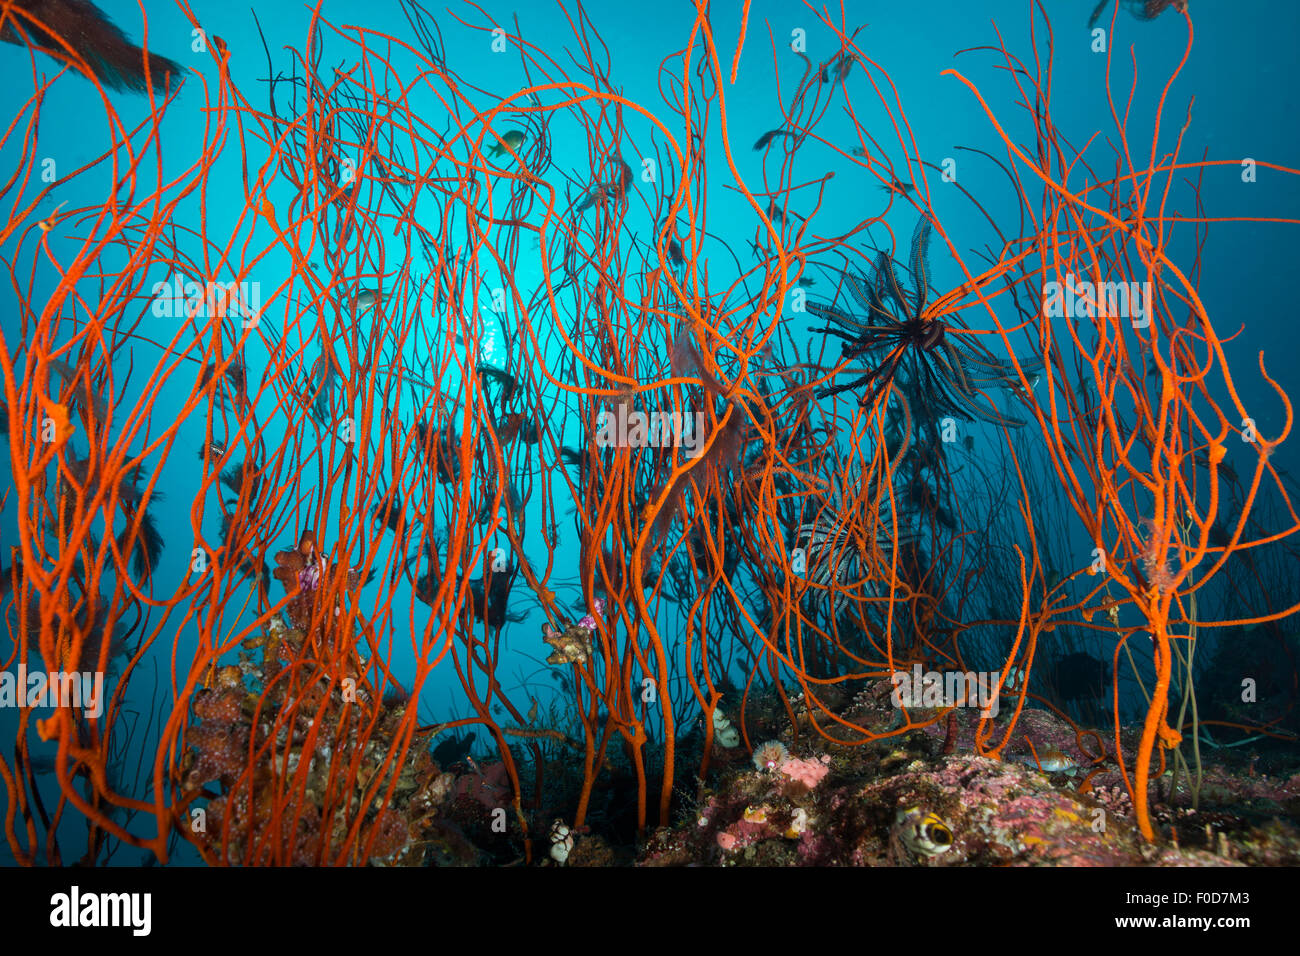 Tangle of wiry red corals with black crinoid, Cenderawasih Bay, West Papua, Indonesia. Stock Photo